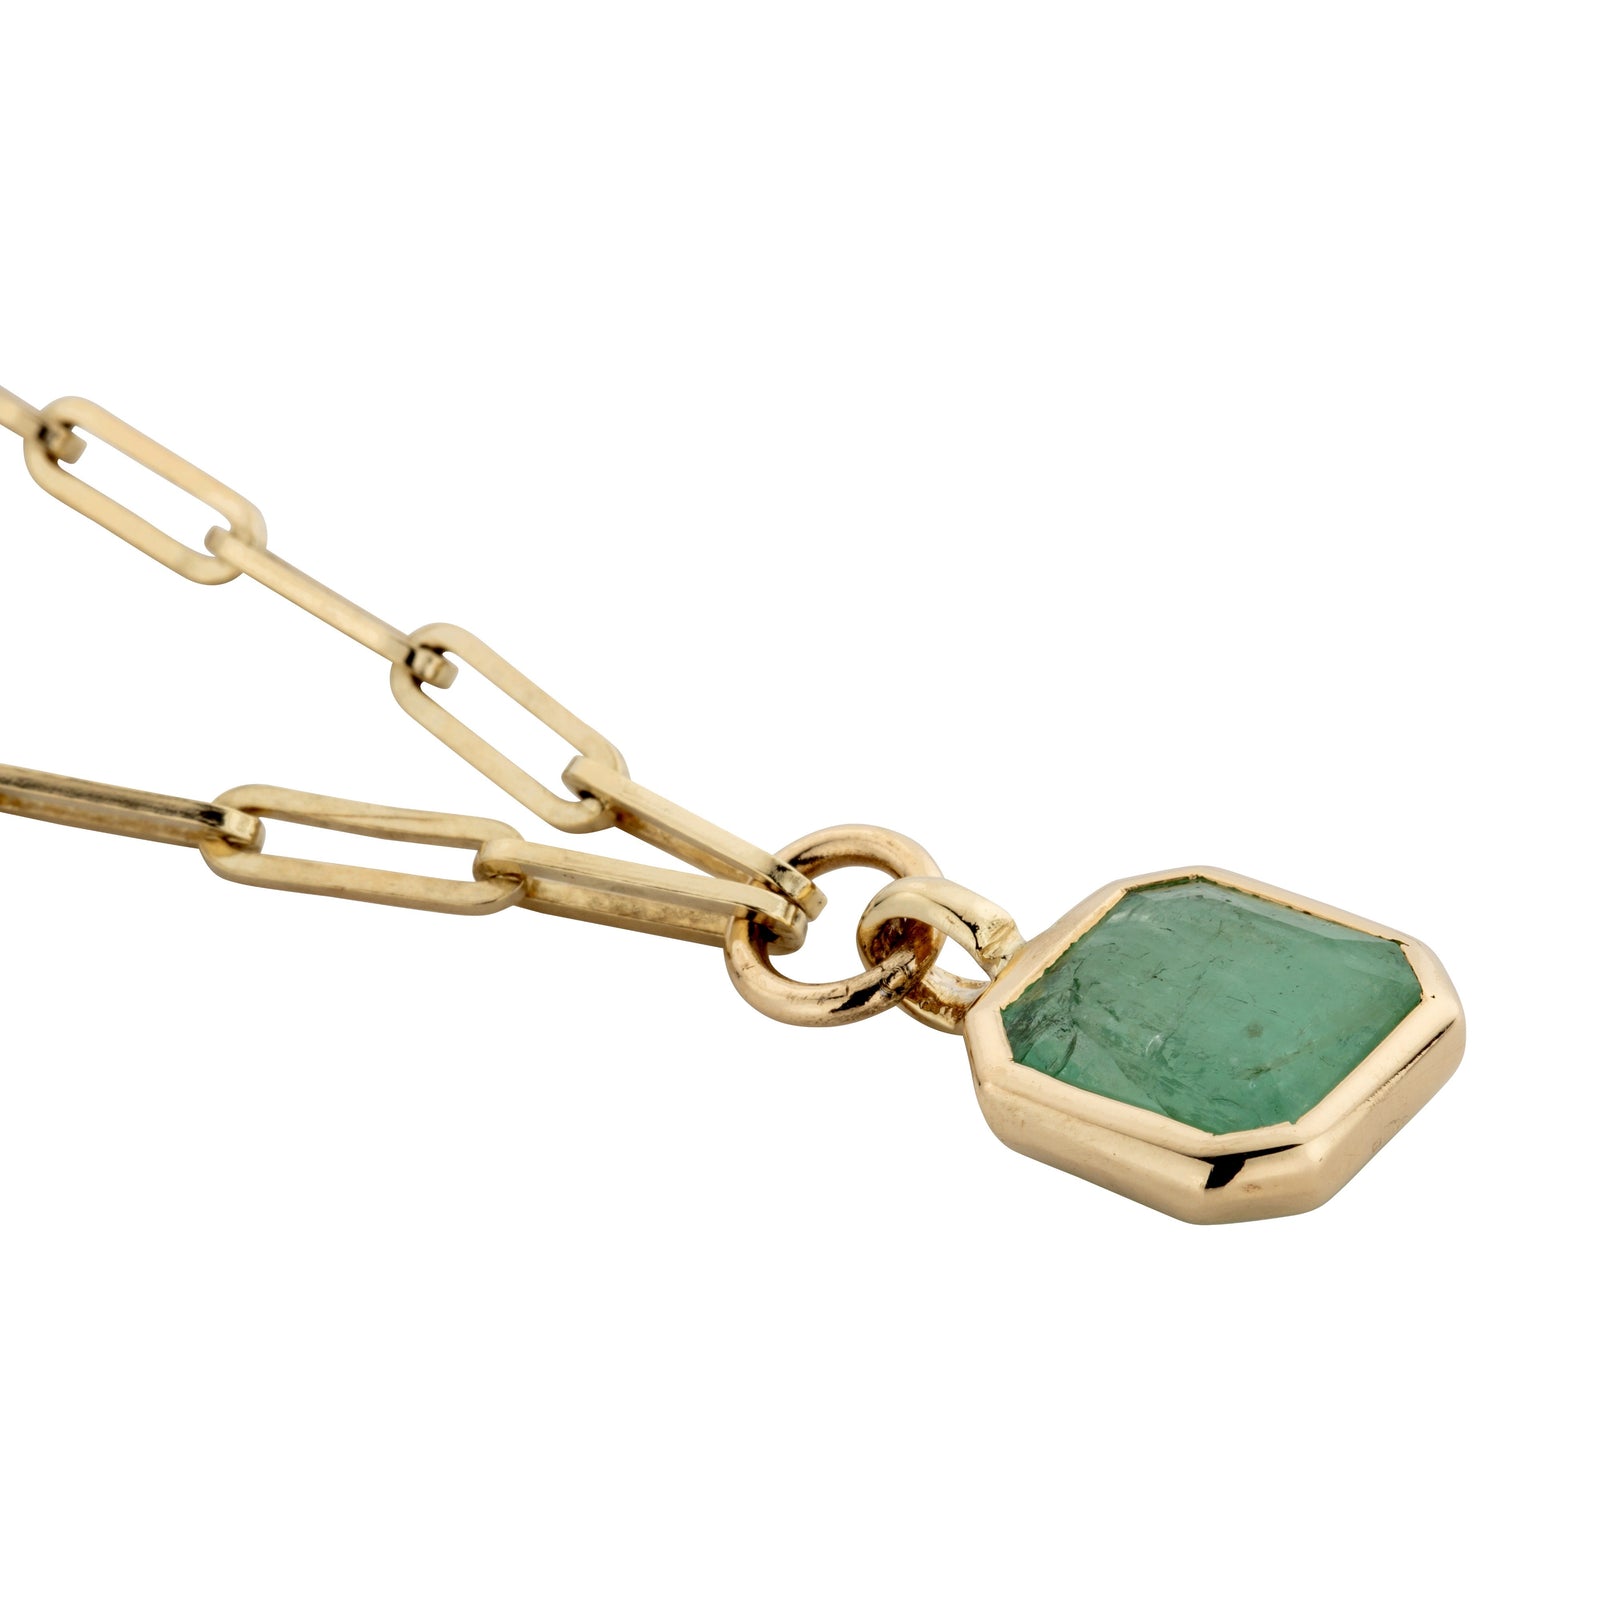 VIRIBUS Gold Emerald Trace Chain Necklace